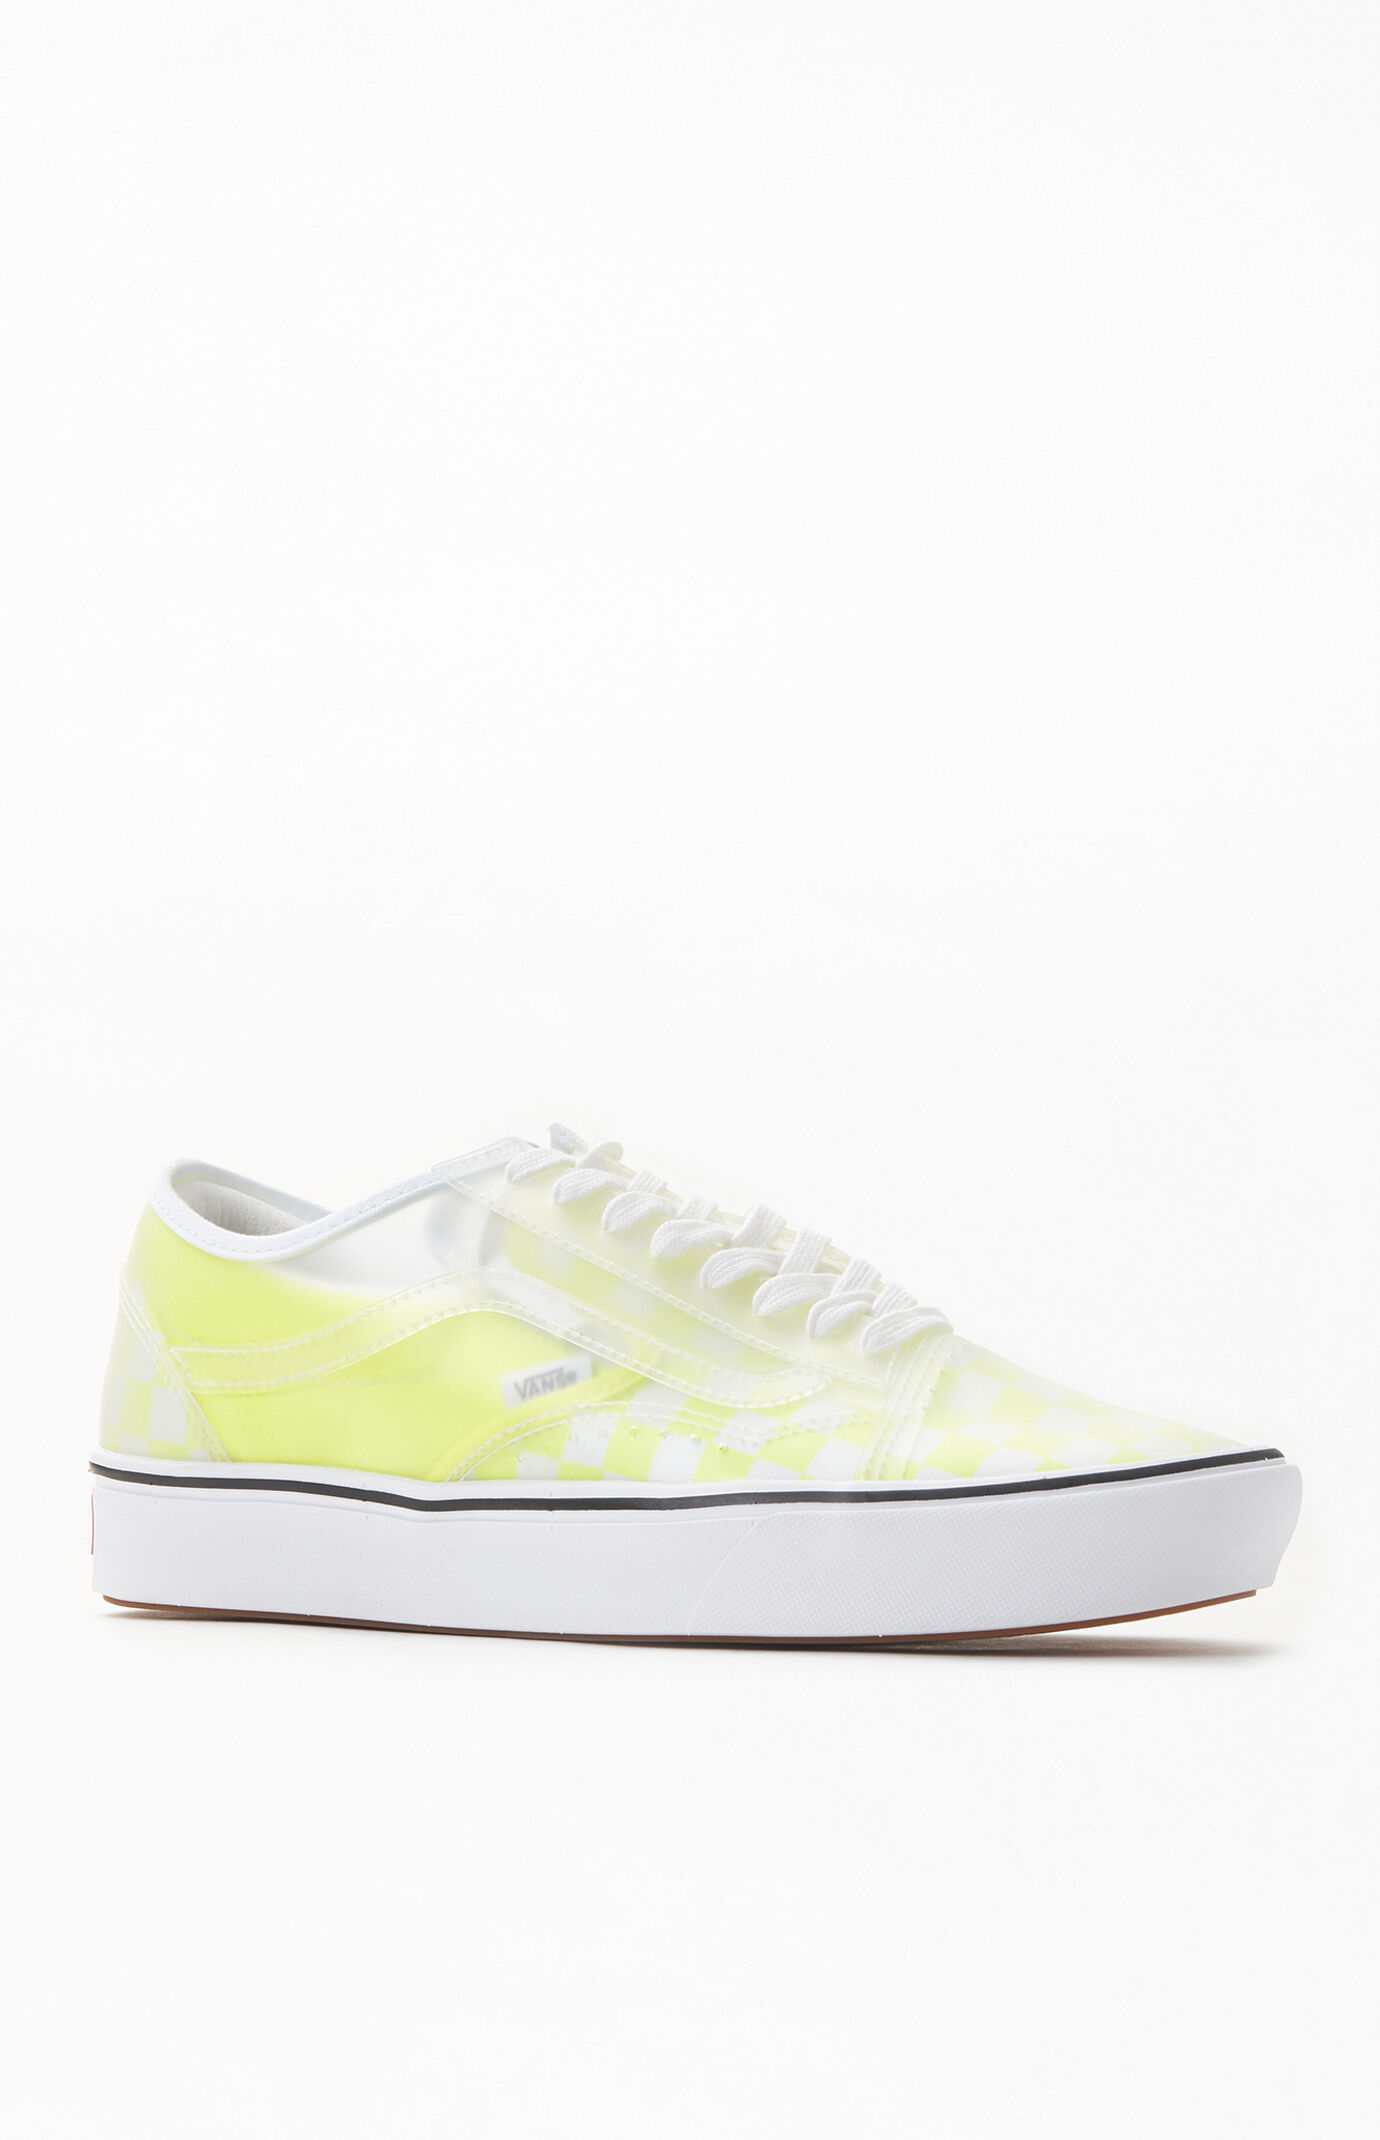 vans yellow checkerboard shoes